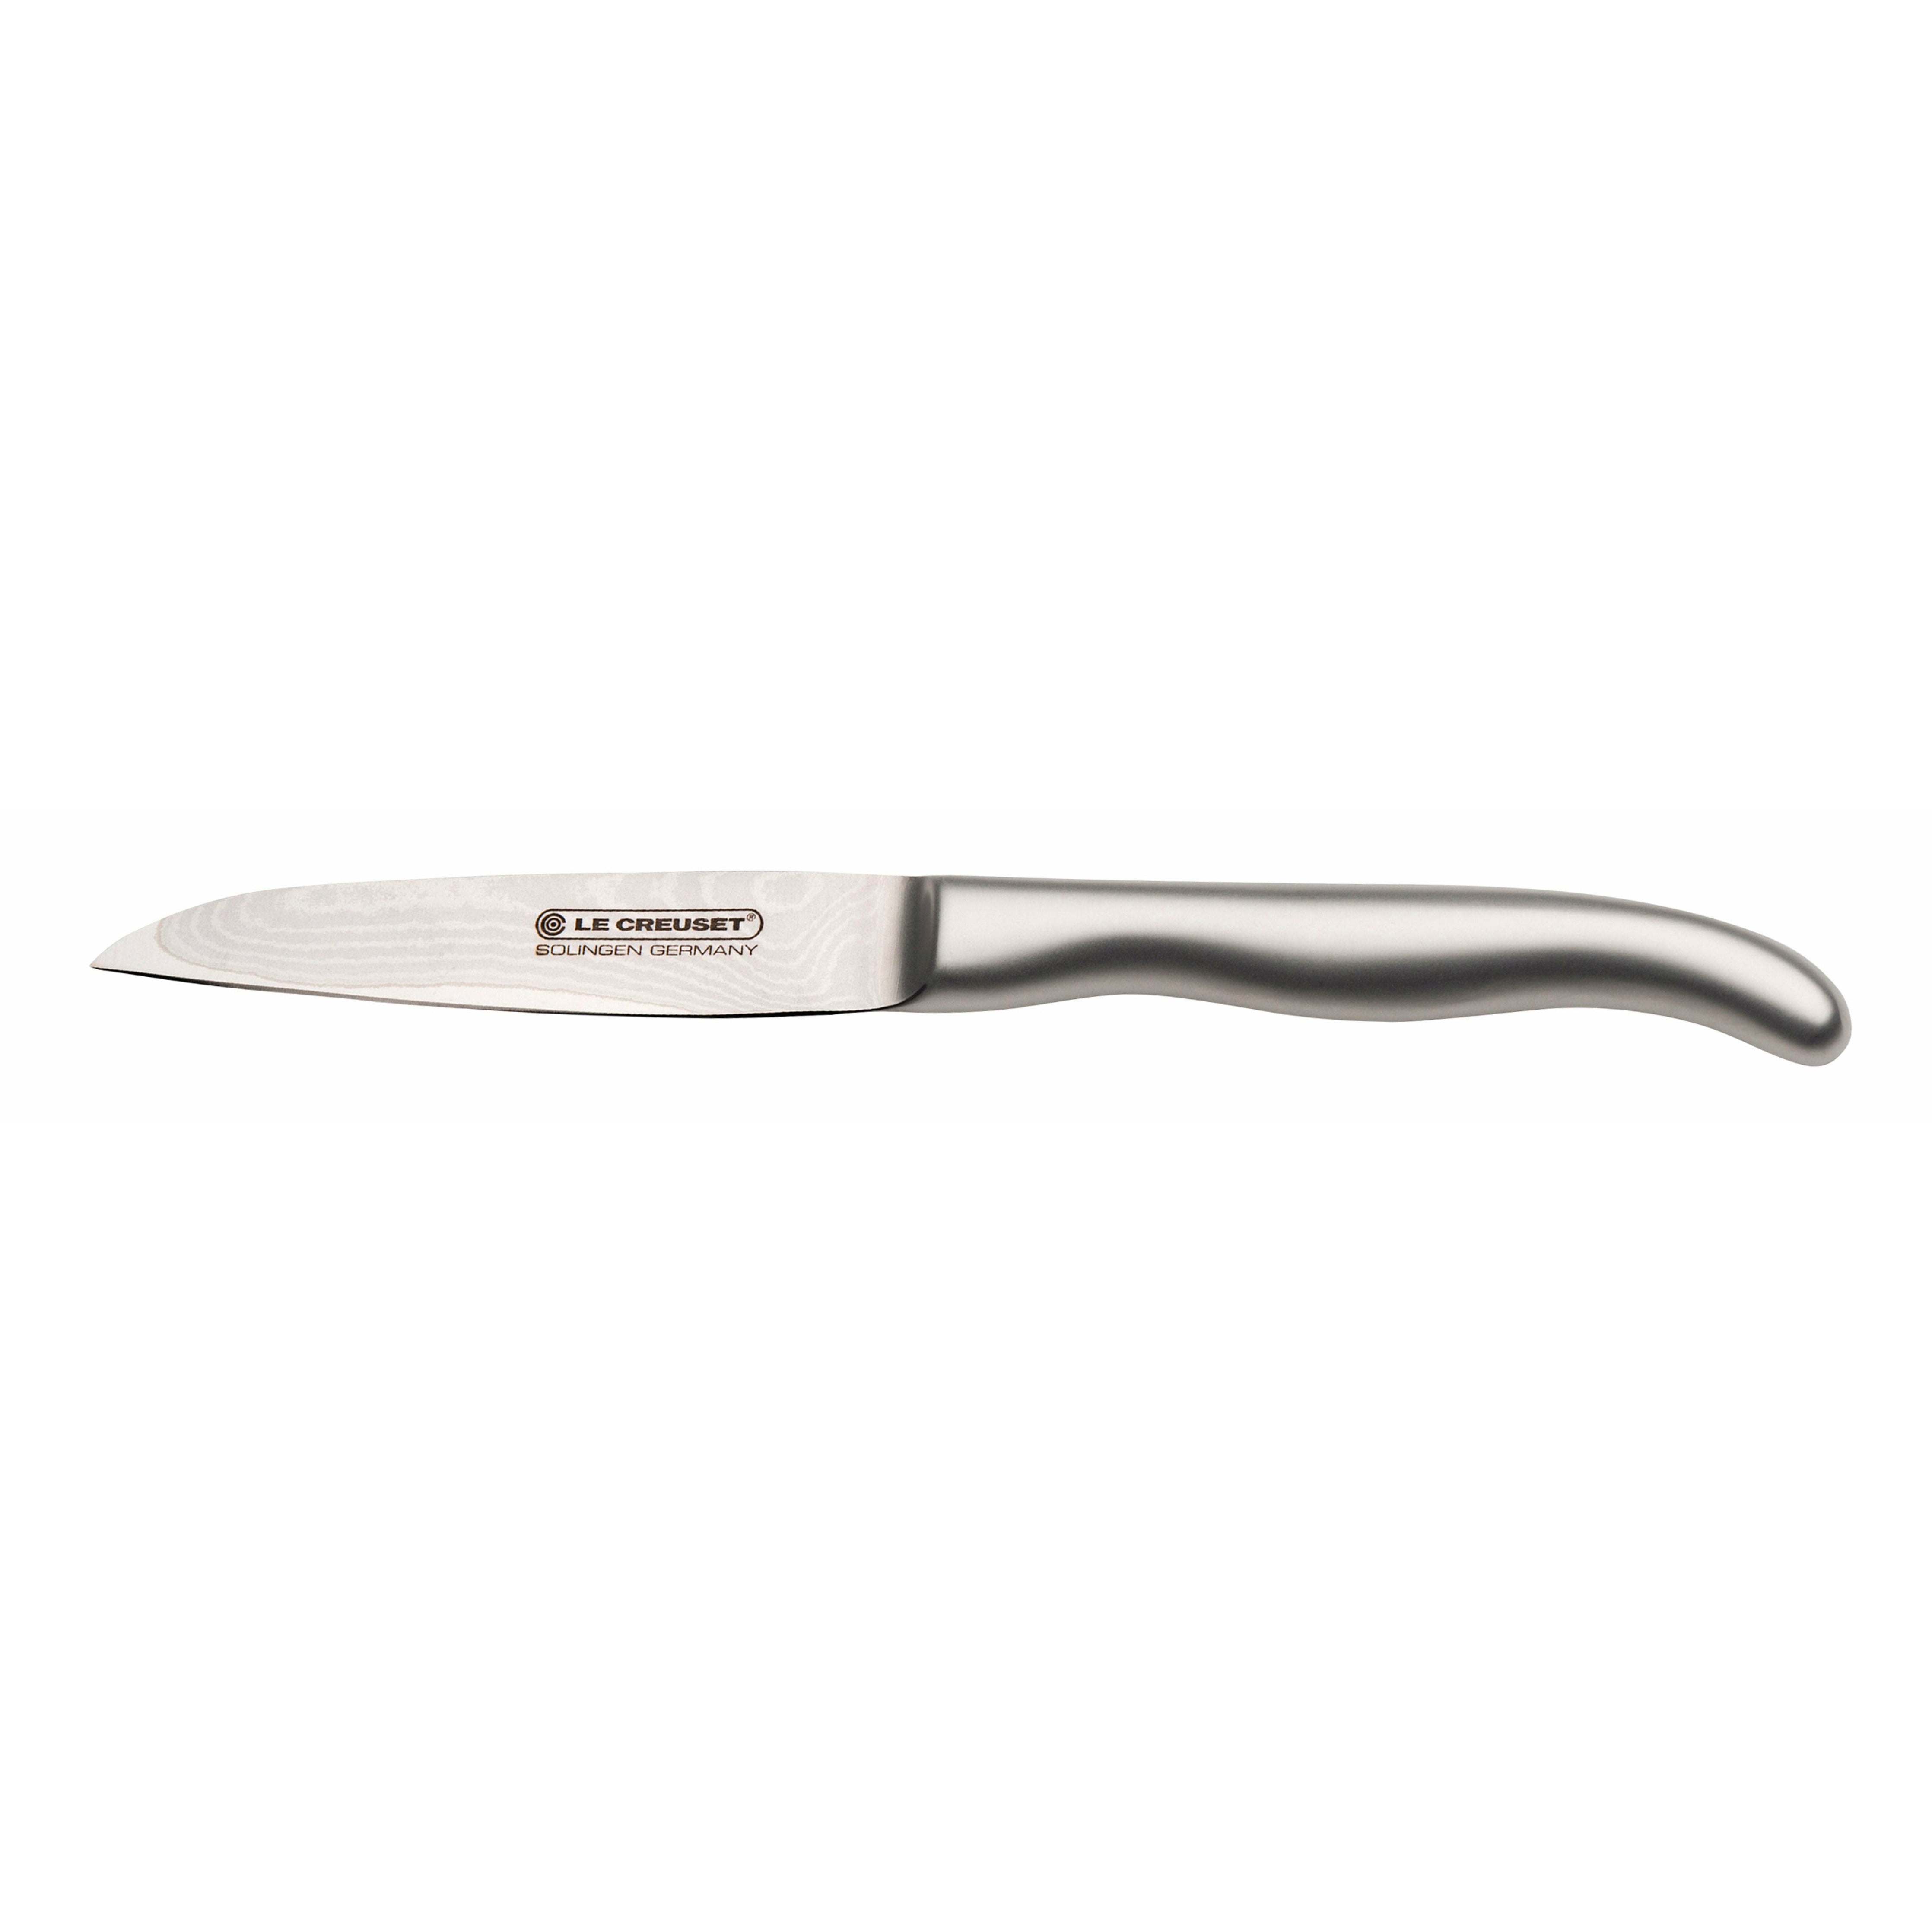 Le Creuset Paring Knife Stainless Steel Handle, 9 Cm